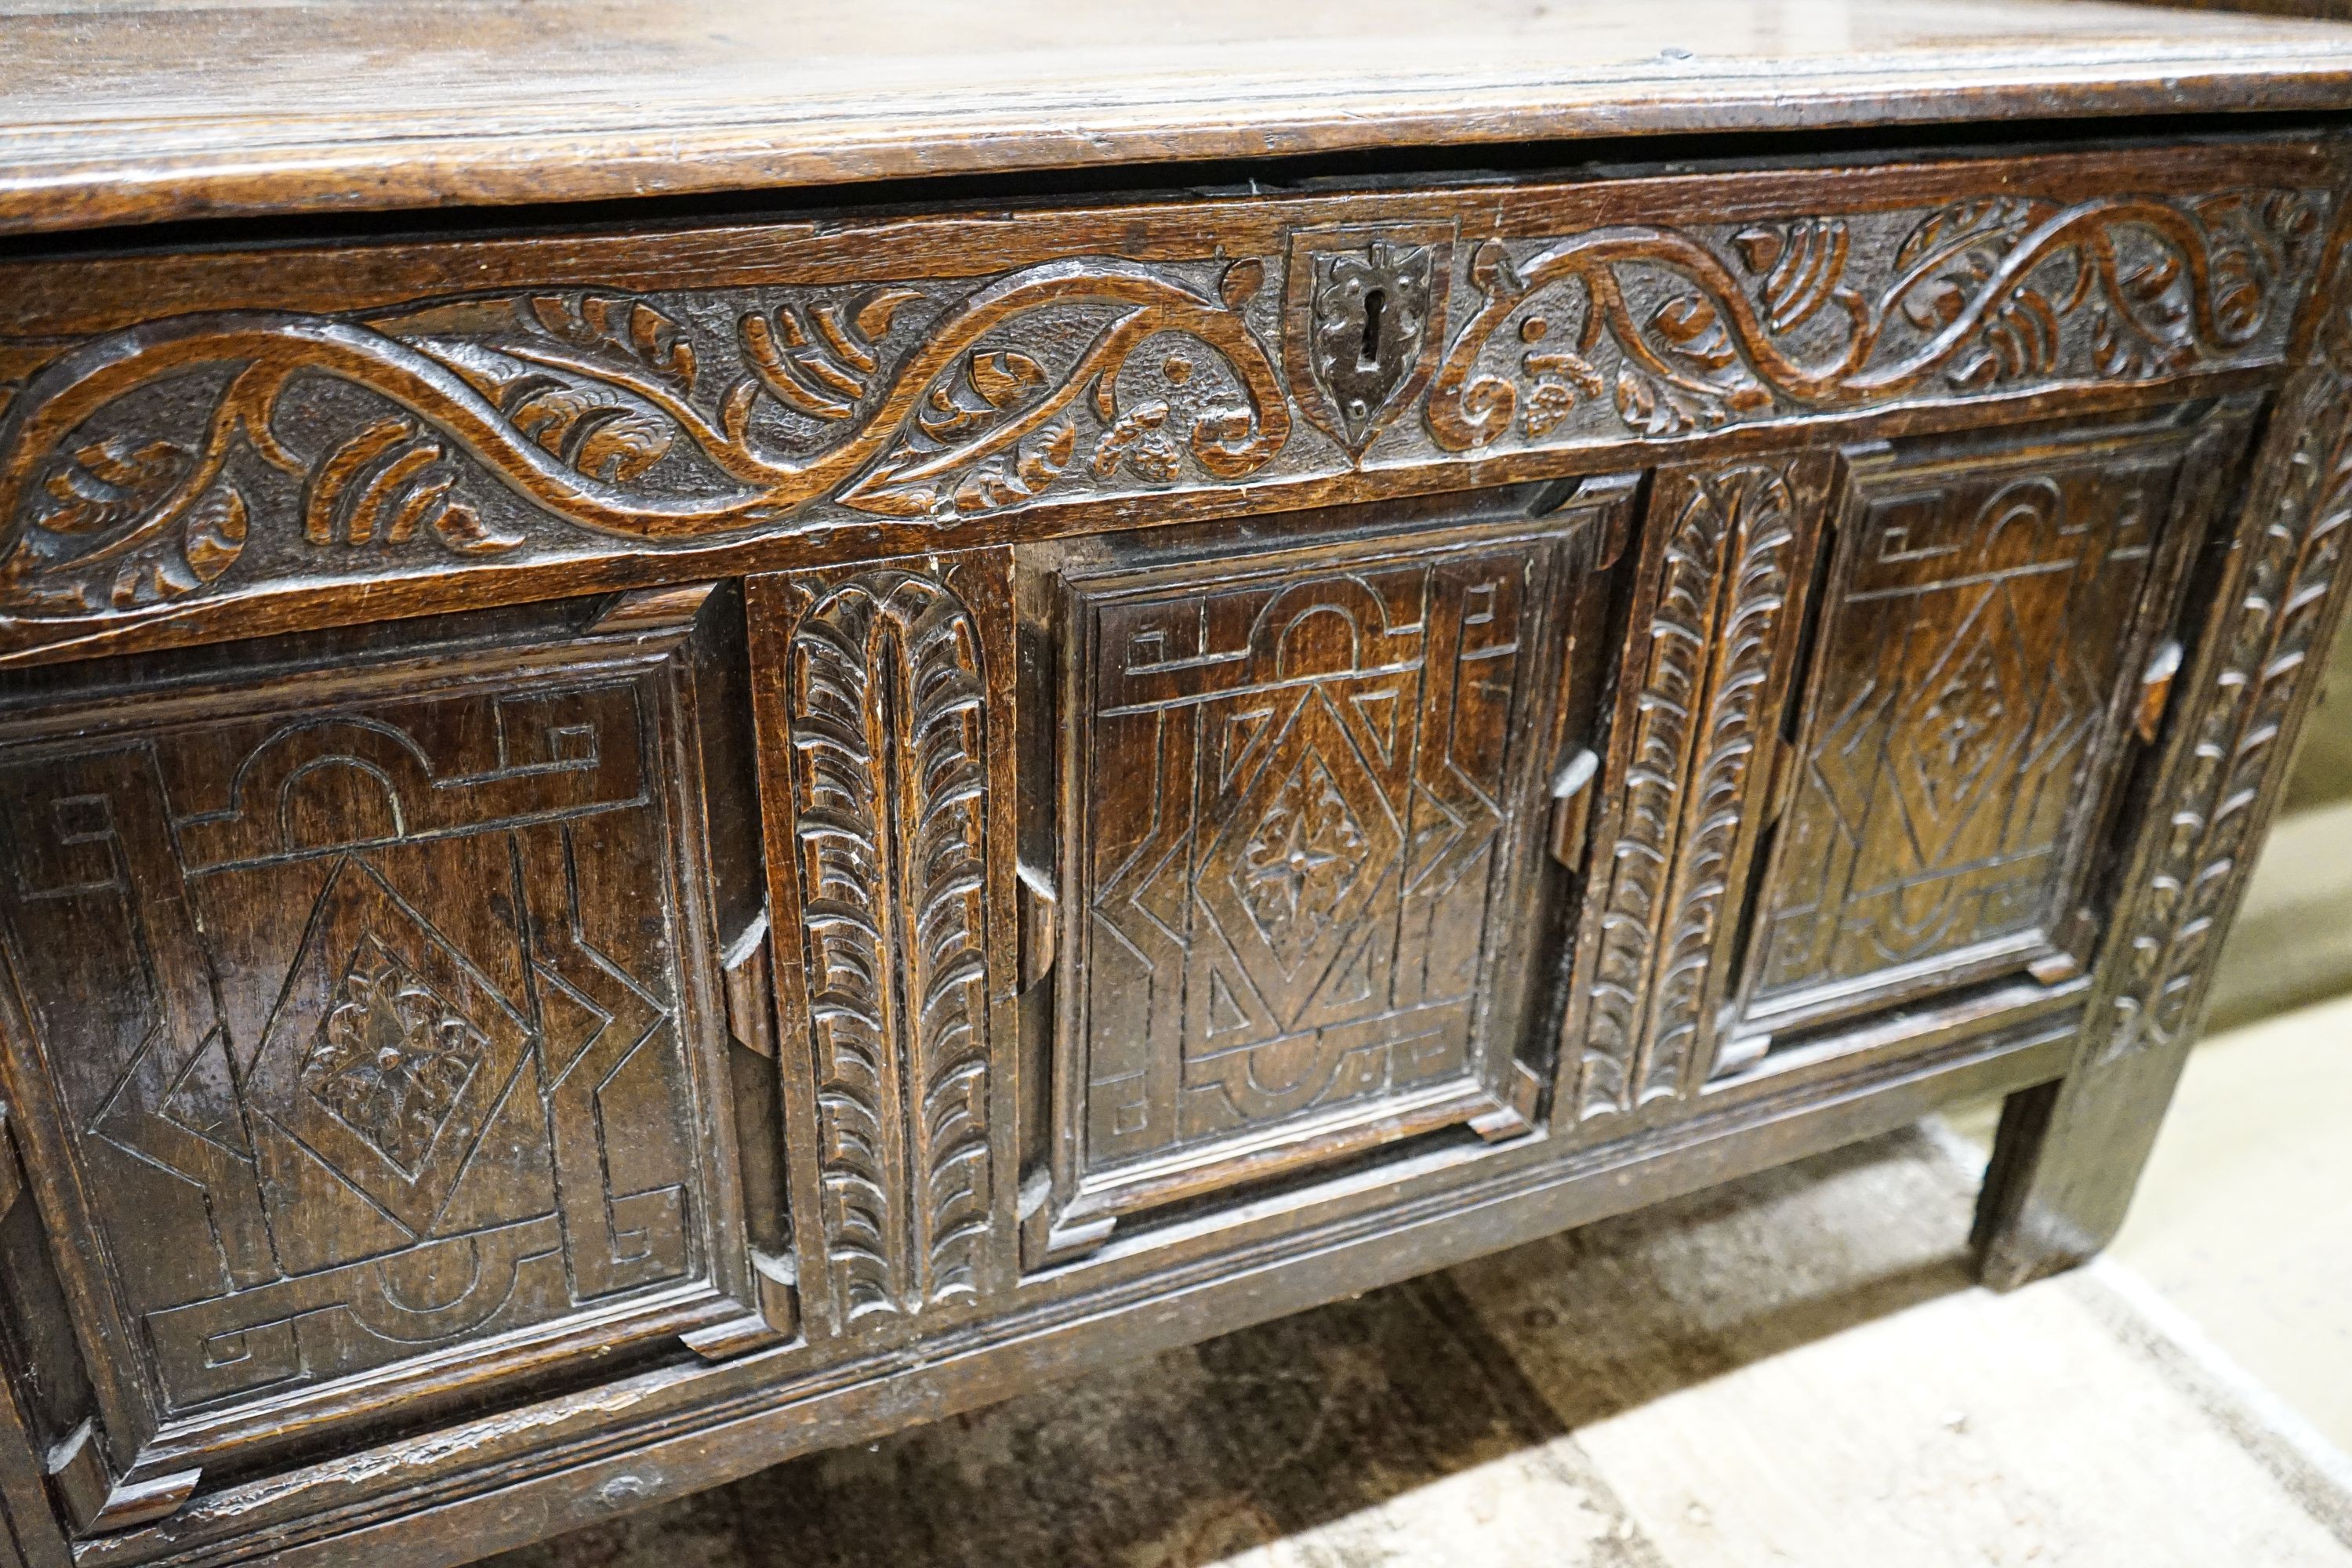 A 17th century oak coffer, with later carved front, length 120cm, depth 56cm, height 69cm